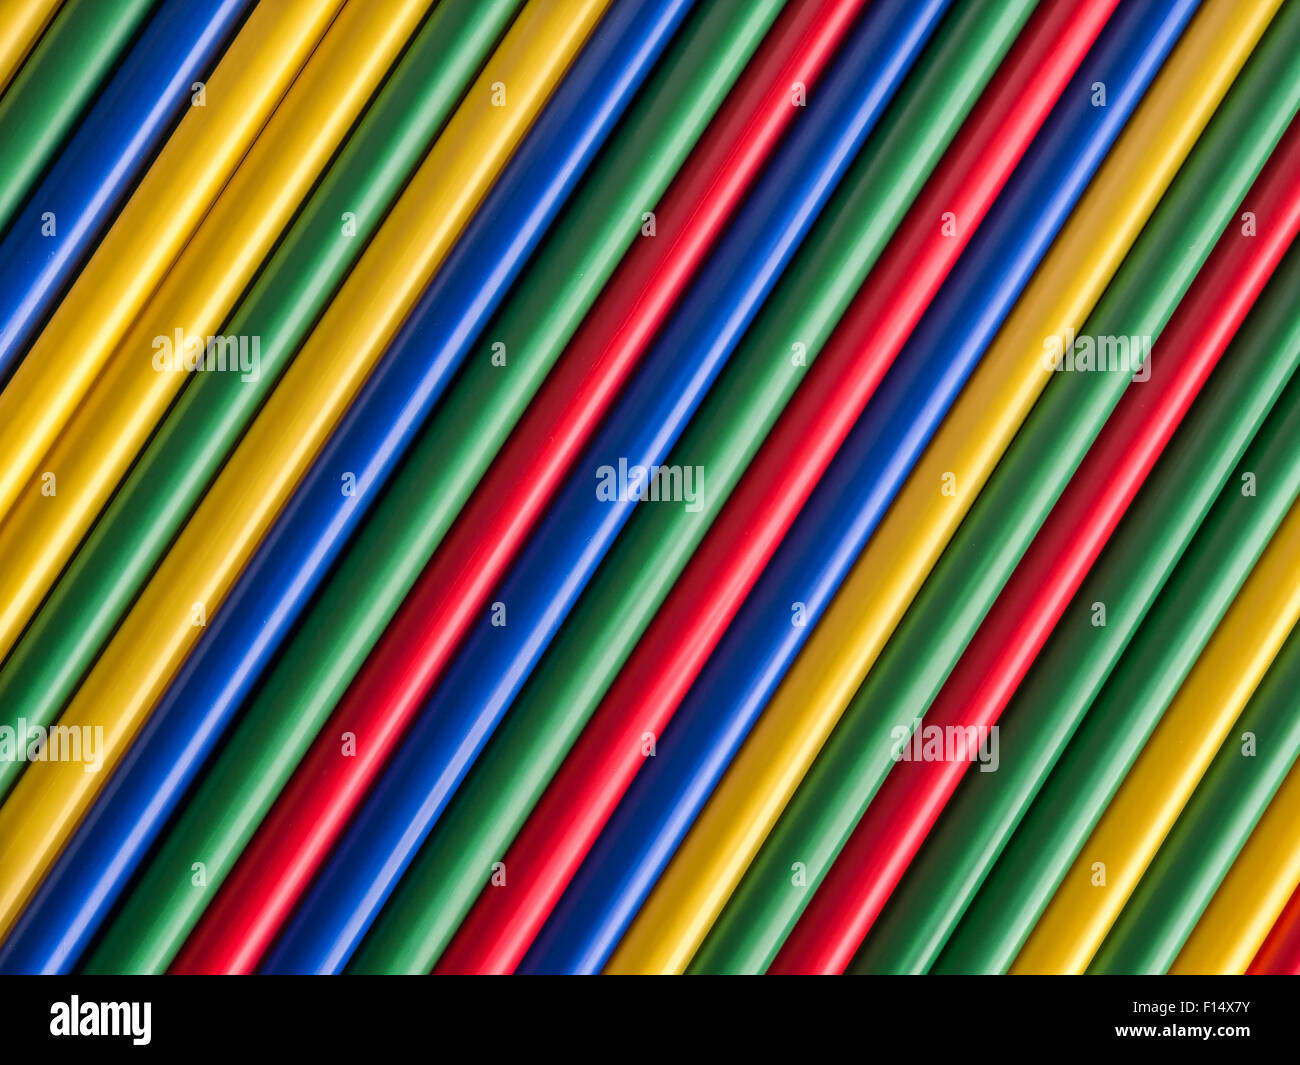 Colorful drinking straws arranged in diagonal straight lines Stock Photo